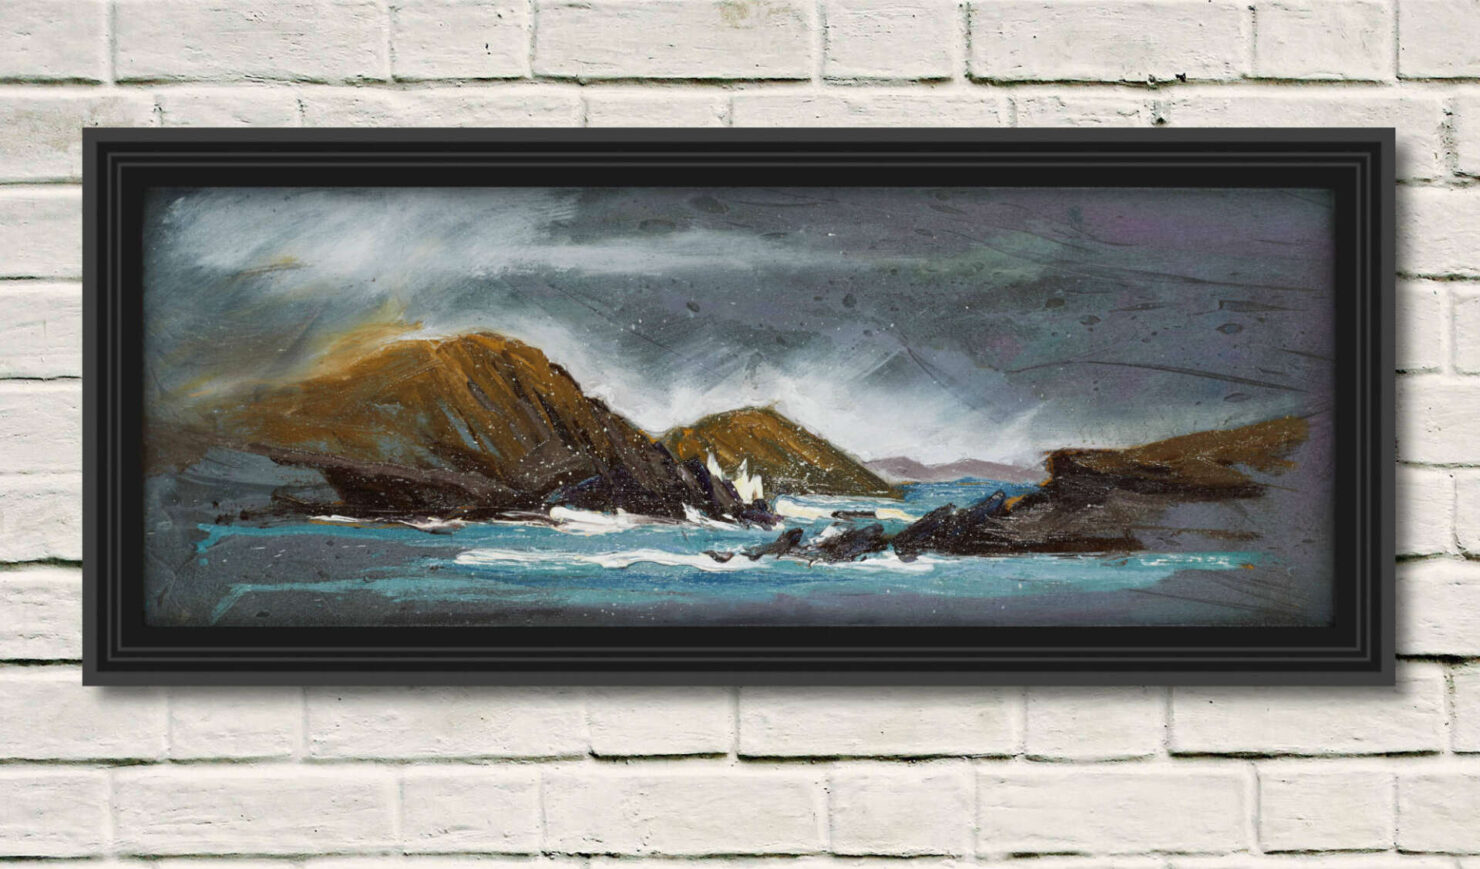 artist rod coyne's seascape "Lady's Ruff Weather" is shown here in a black frame on a white wall.